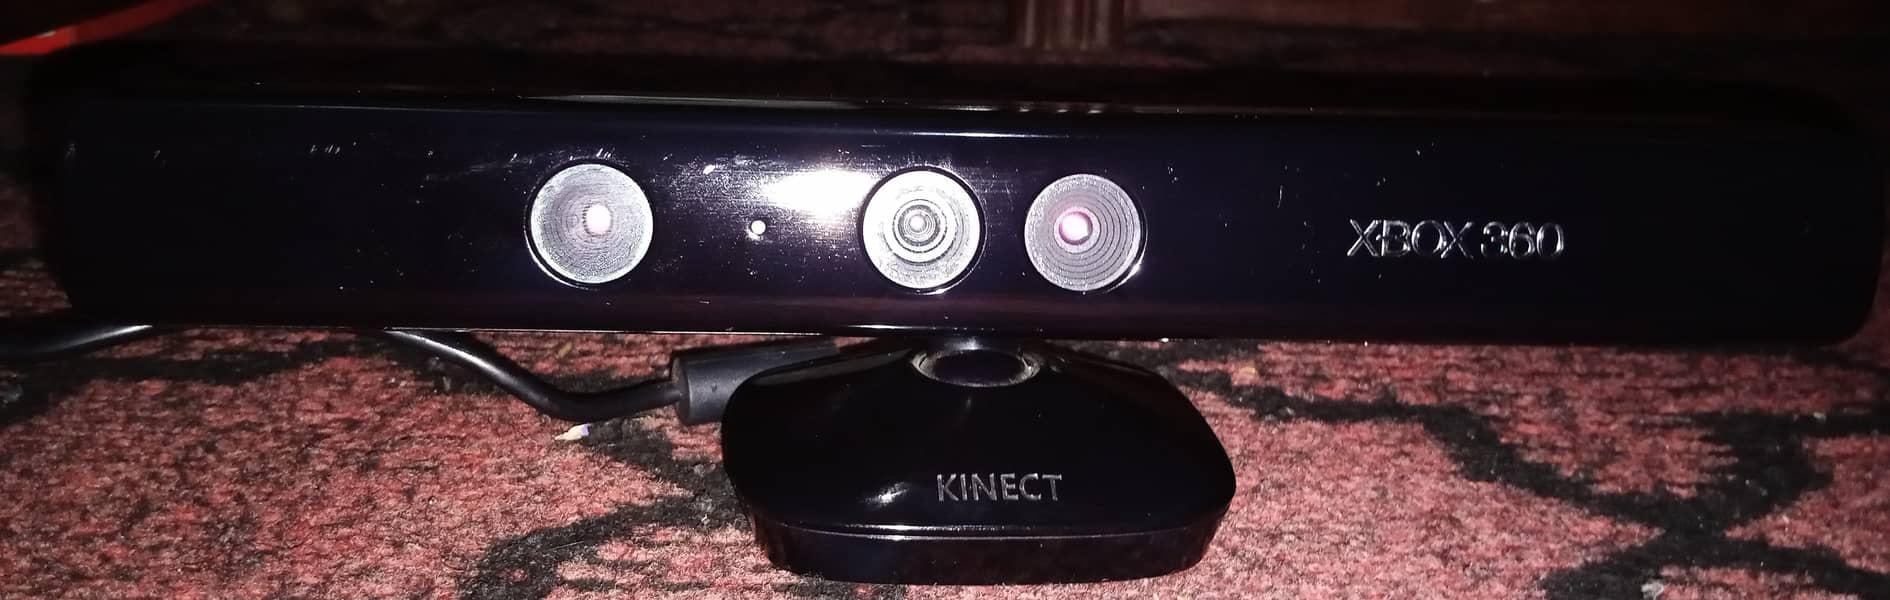 Xbox 360 JTAG with Kinect and two controllers 2